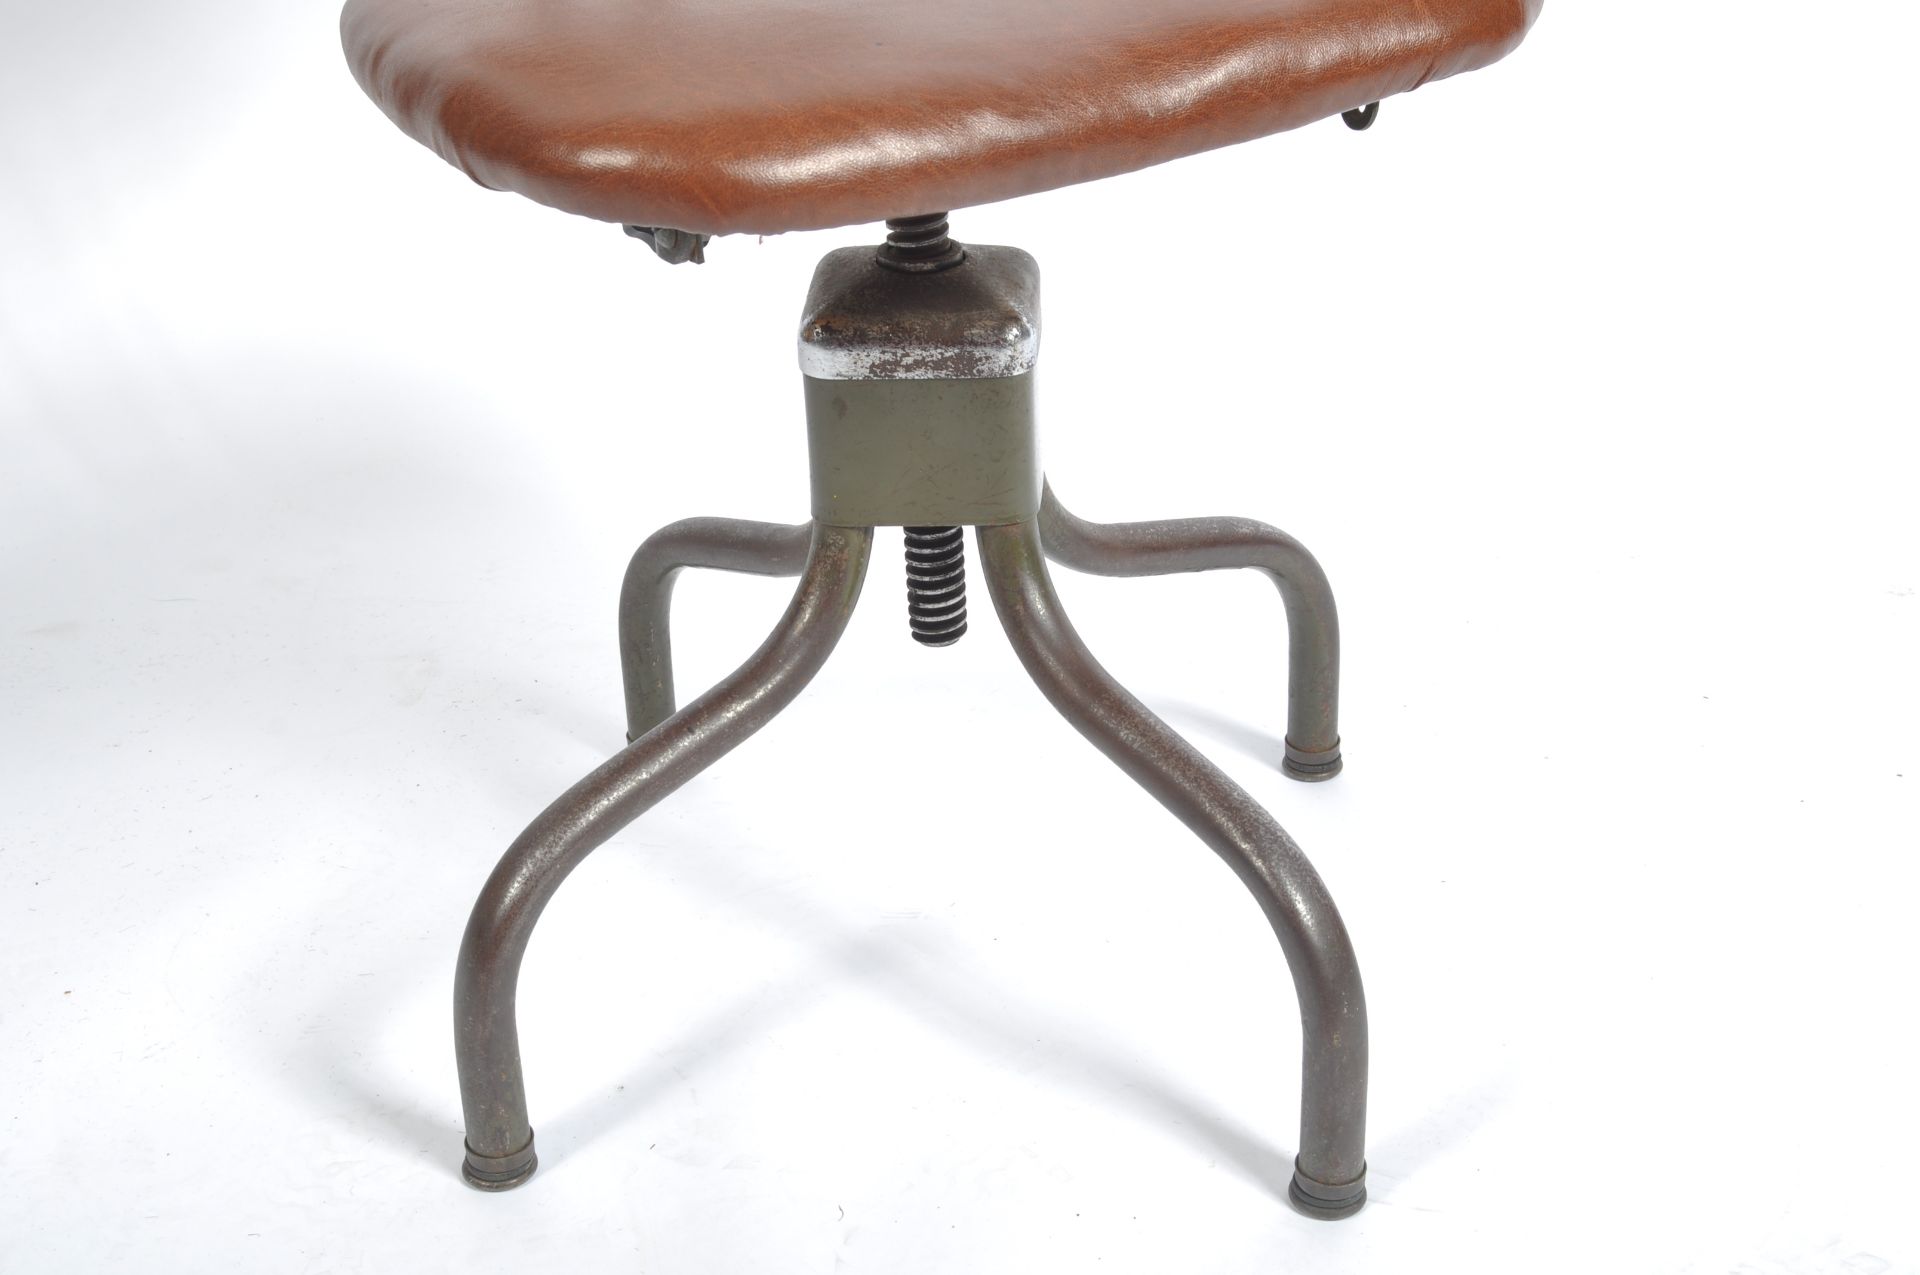 EVERTAUT - VINTAGE INDUSTRIAL MACHINISTS ADJUSTABLE CHAIR - Image 5 of 5